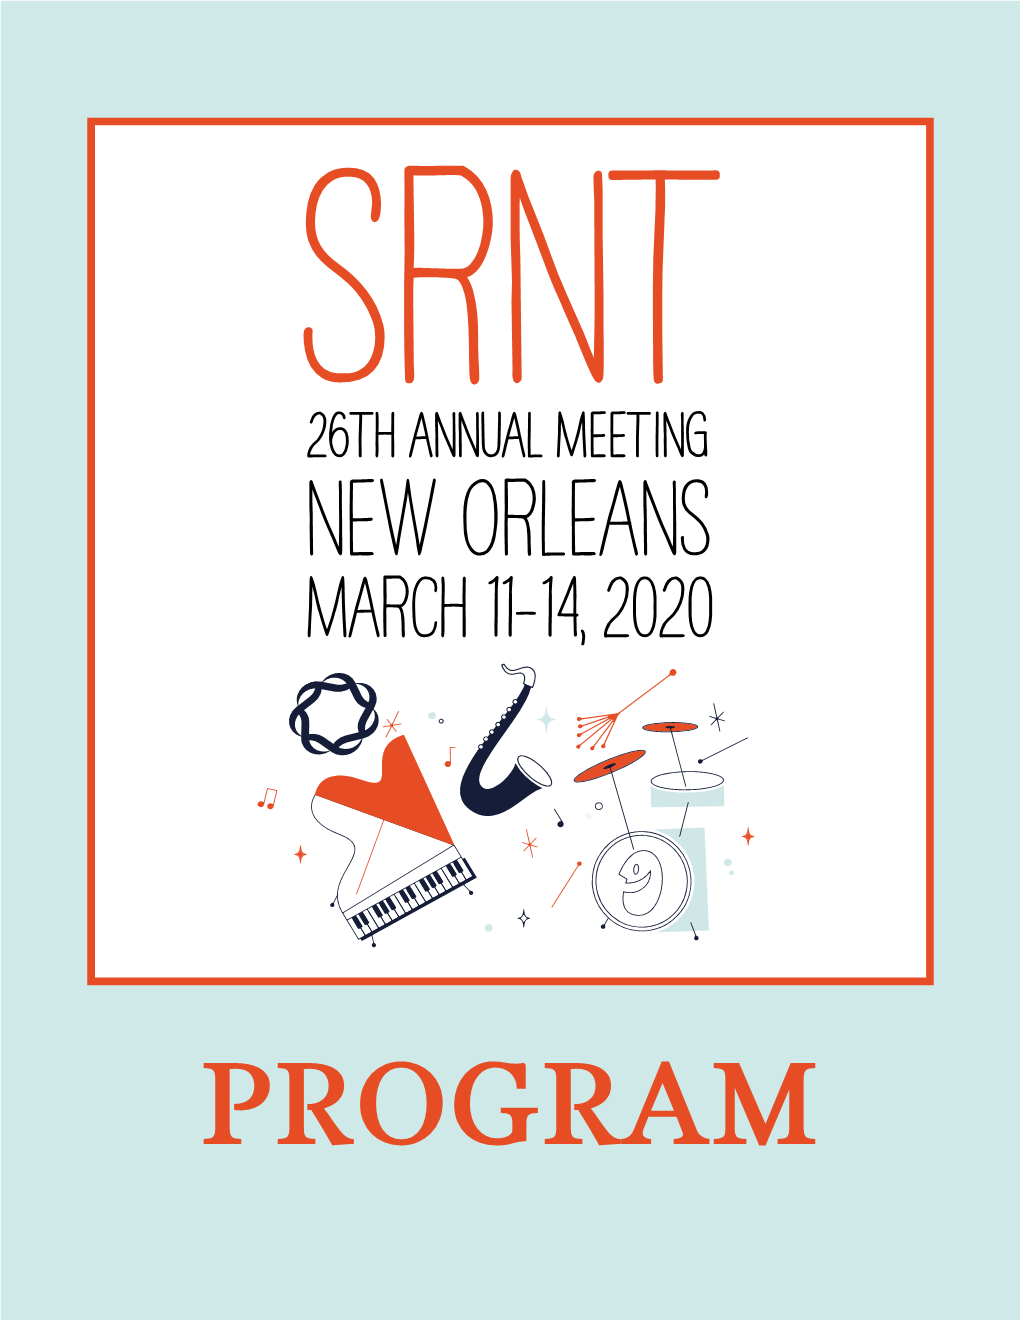 New Orleans March 11-14, 2020